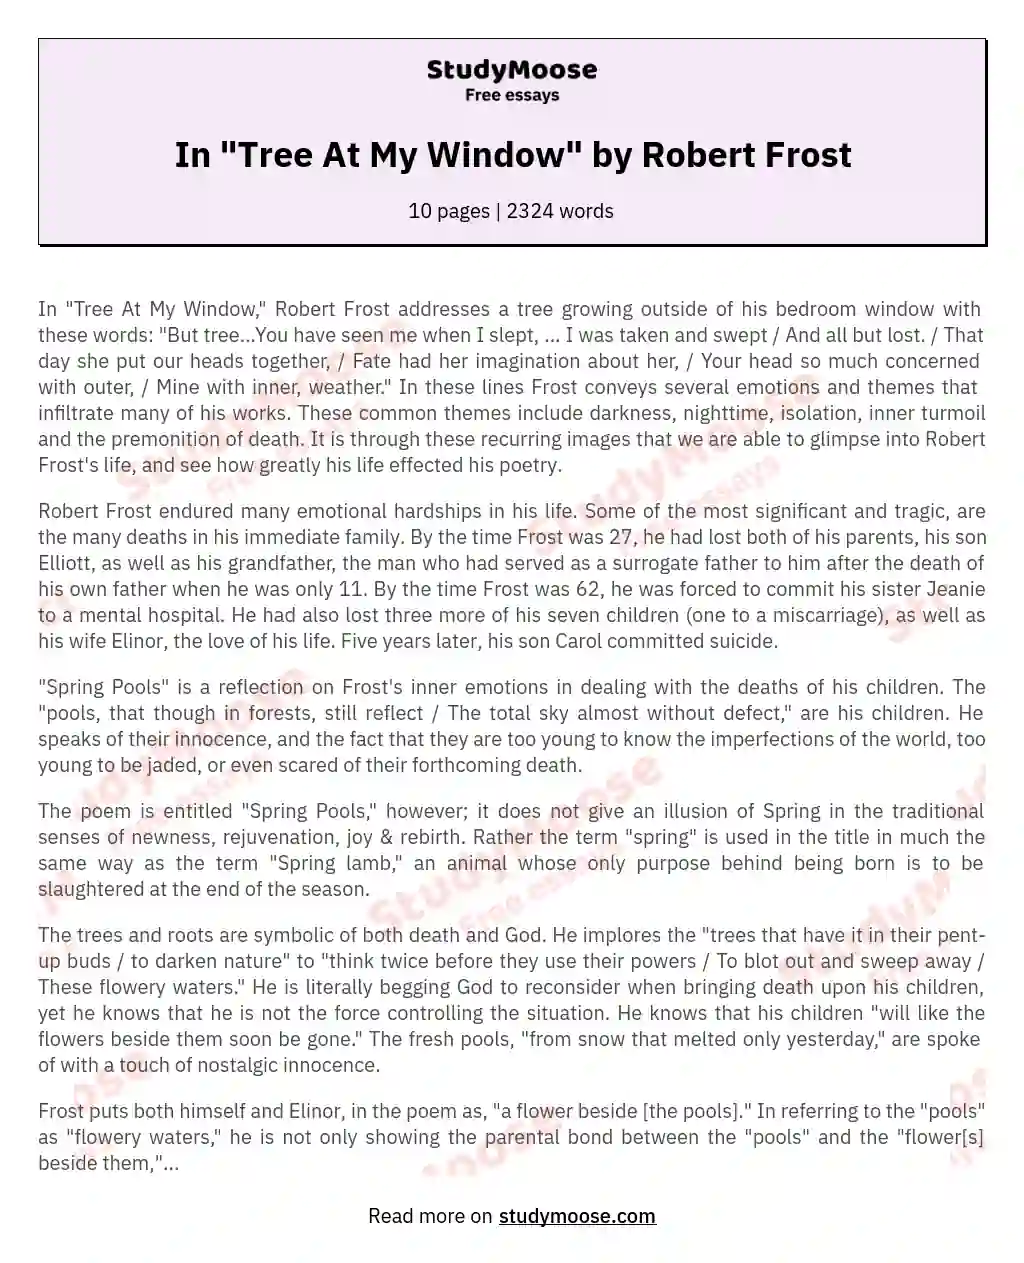 In "Tree At My Window" by Robert Frost essay